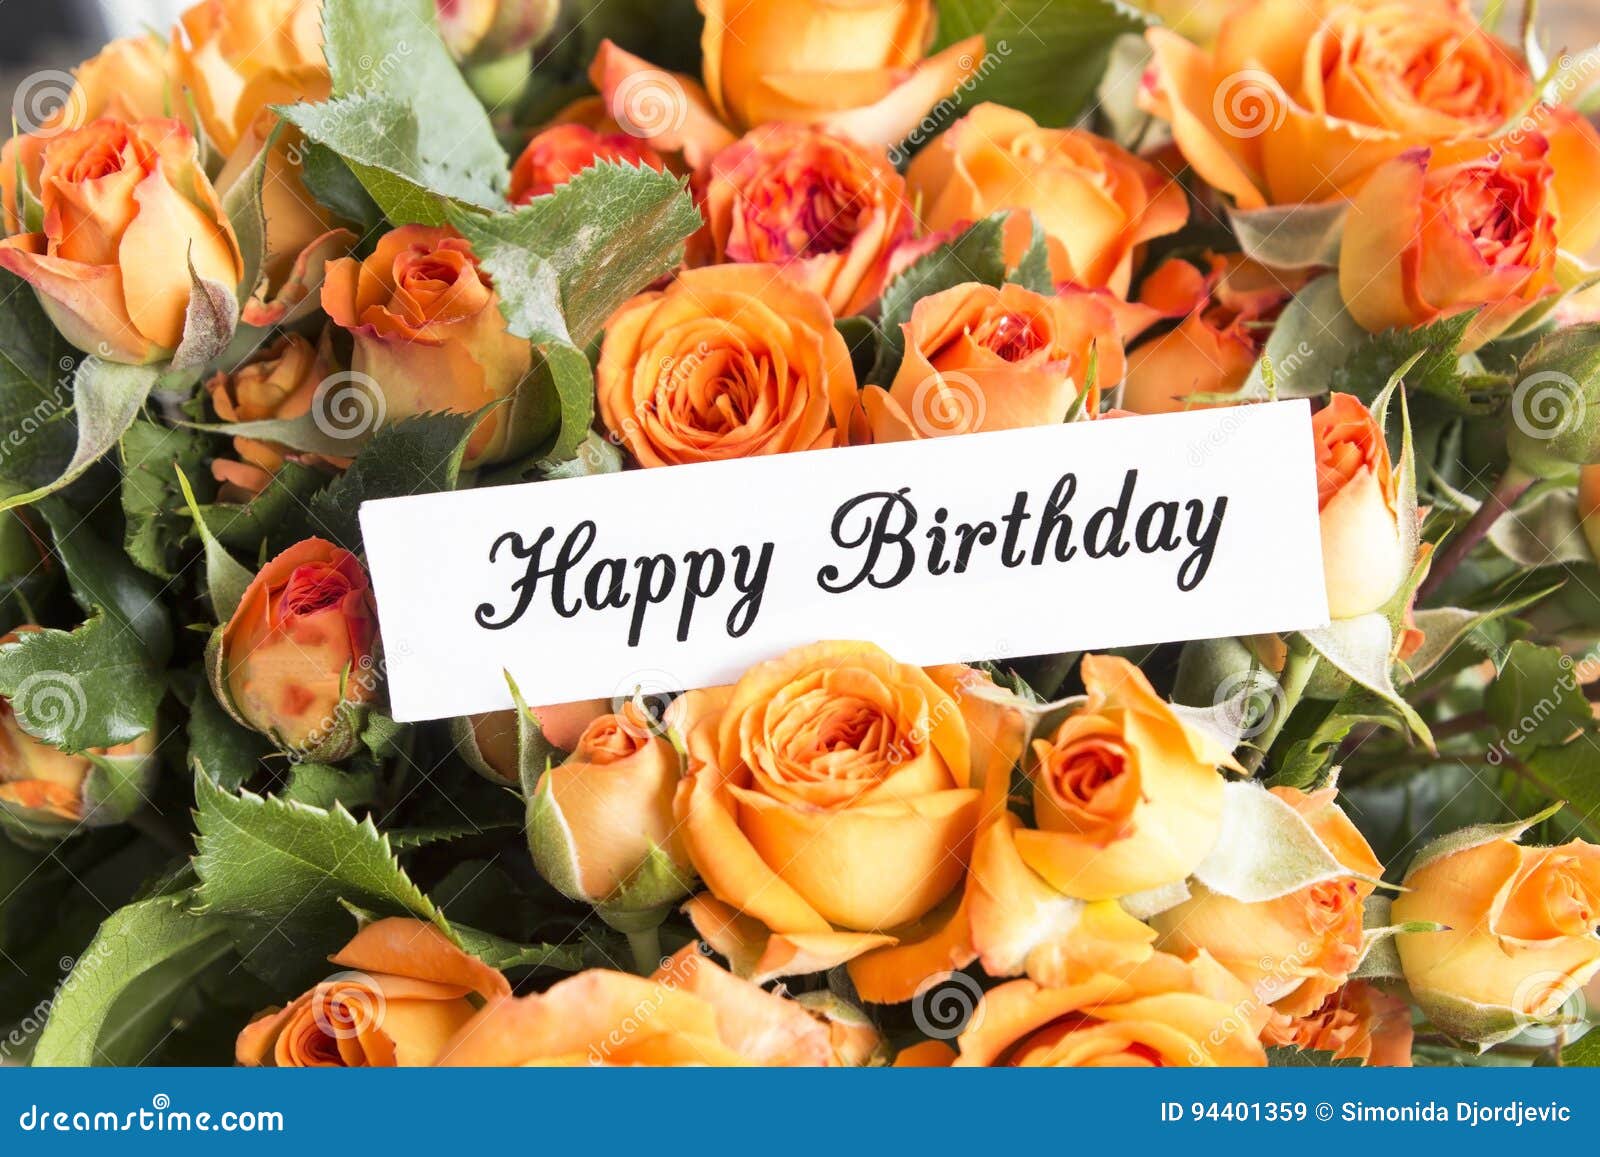 Happy Birthday Card with Bouquet of Orange Roses Stock Image ...